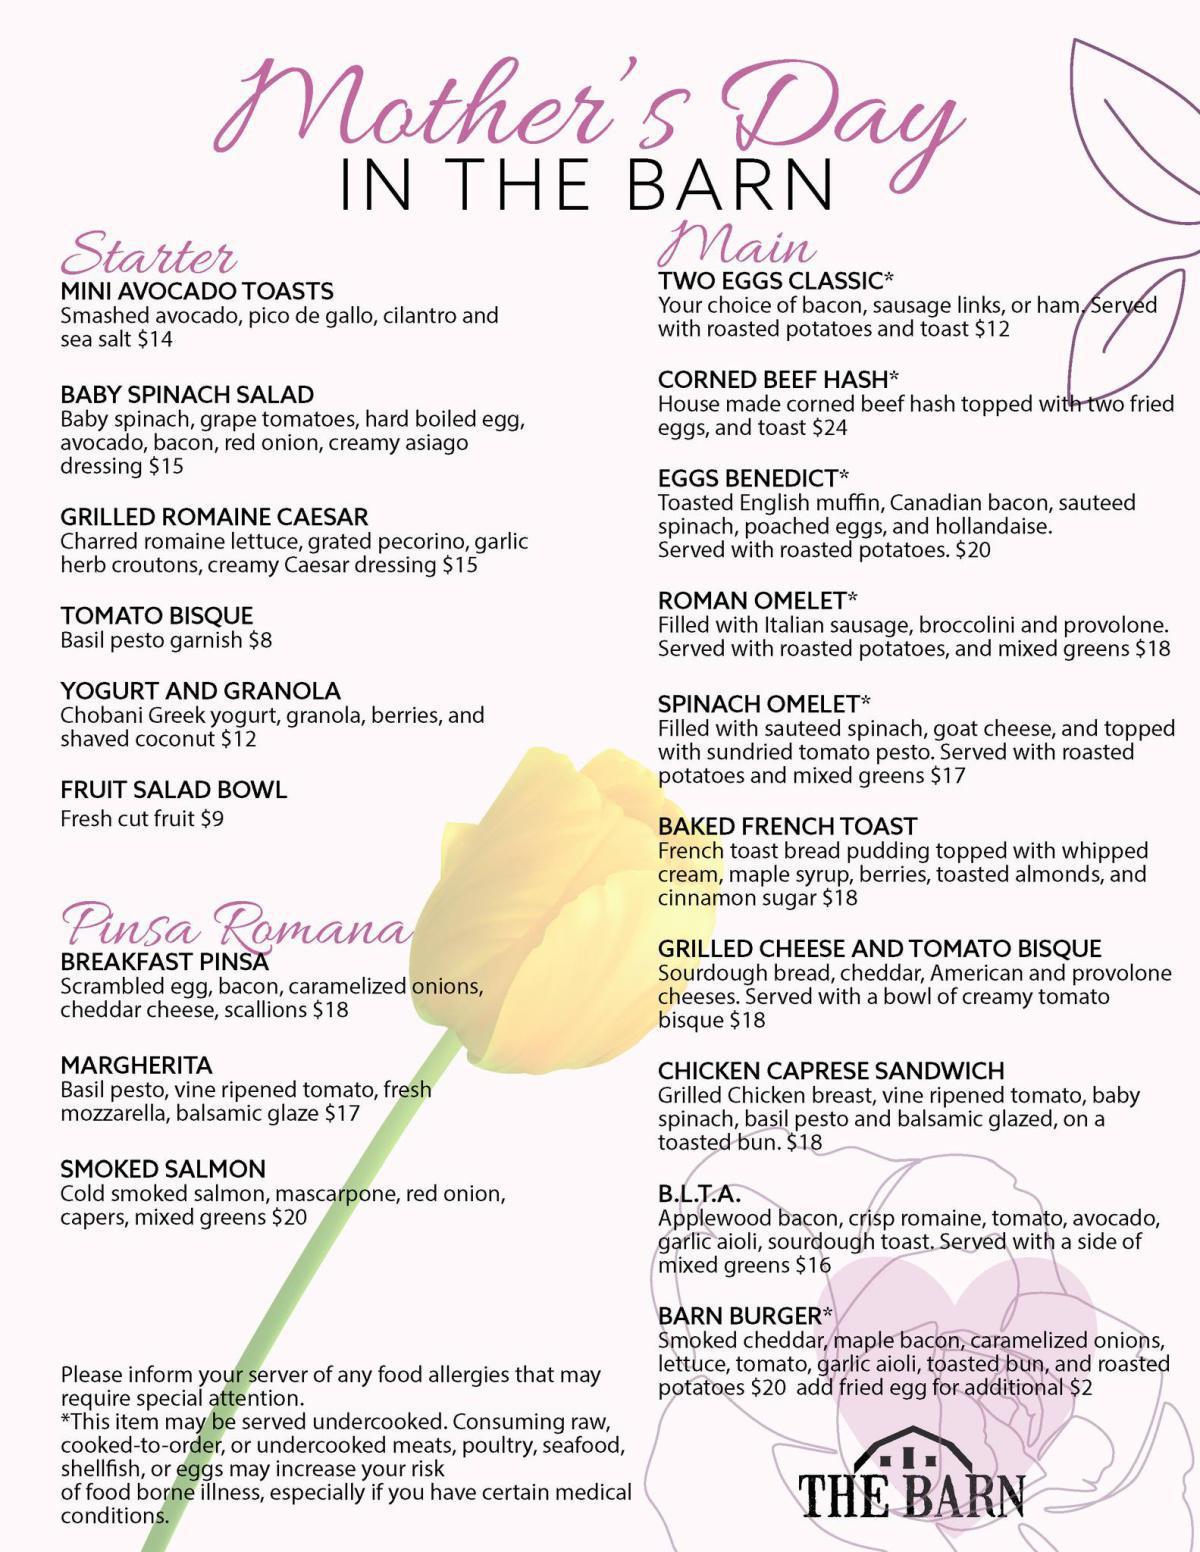 Mother's Day brunch at the Barn